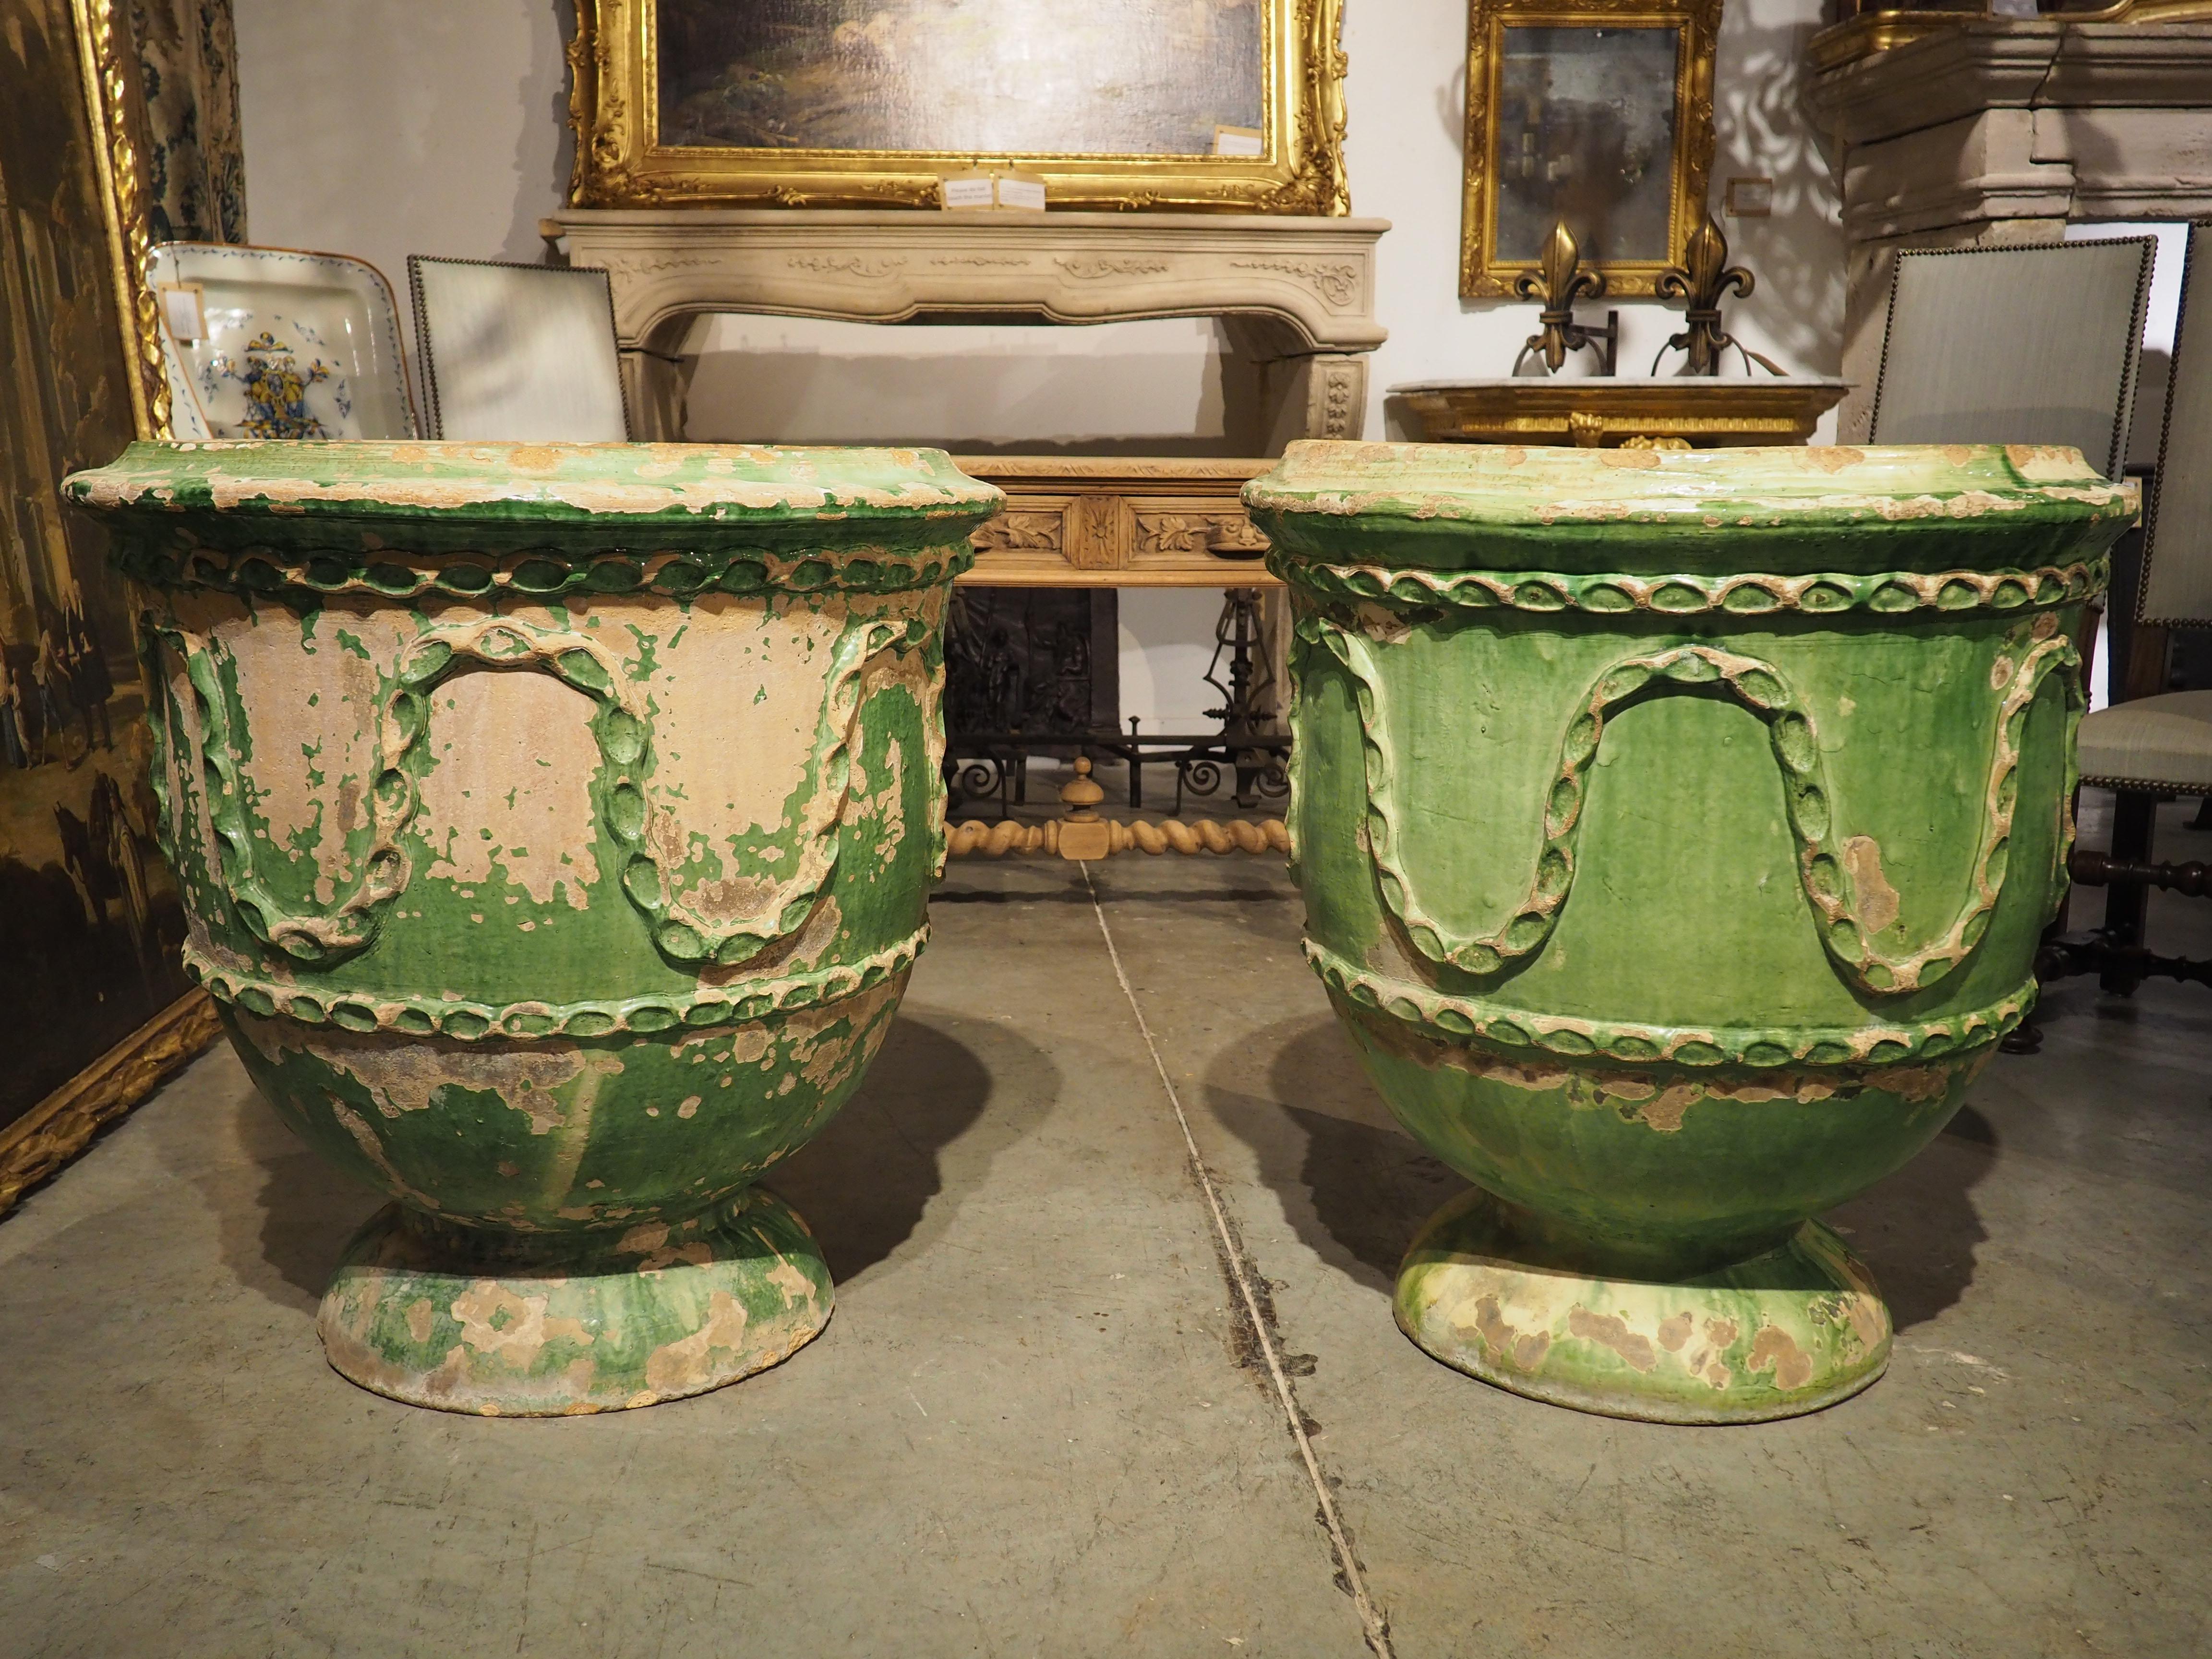 This pair of green glazed terra cotta pots are from the 1800’s from Salon-de-Provence (informally known as Salon). Salon is a commune in the South of France, best known for being the final residence of Nostradamus. Our pair is reminiscent of the